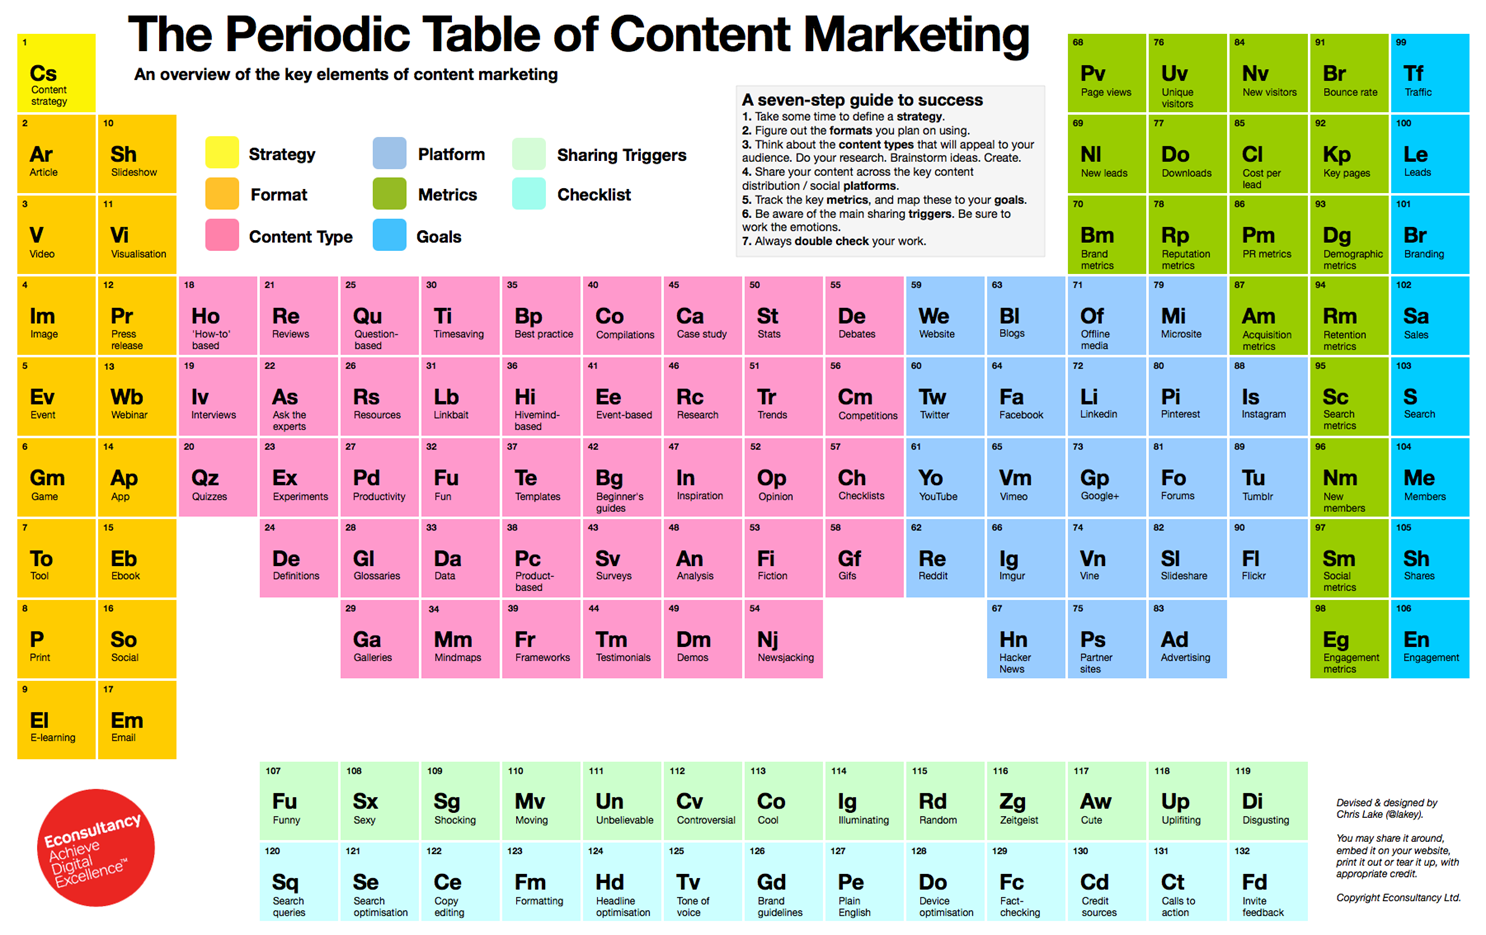 Periodic Table of Content Marketing.png